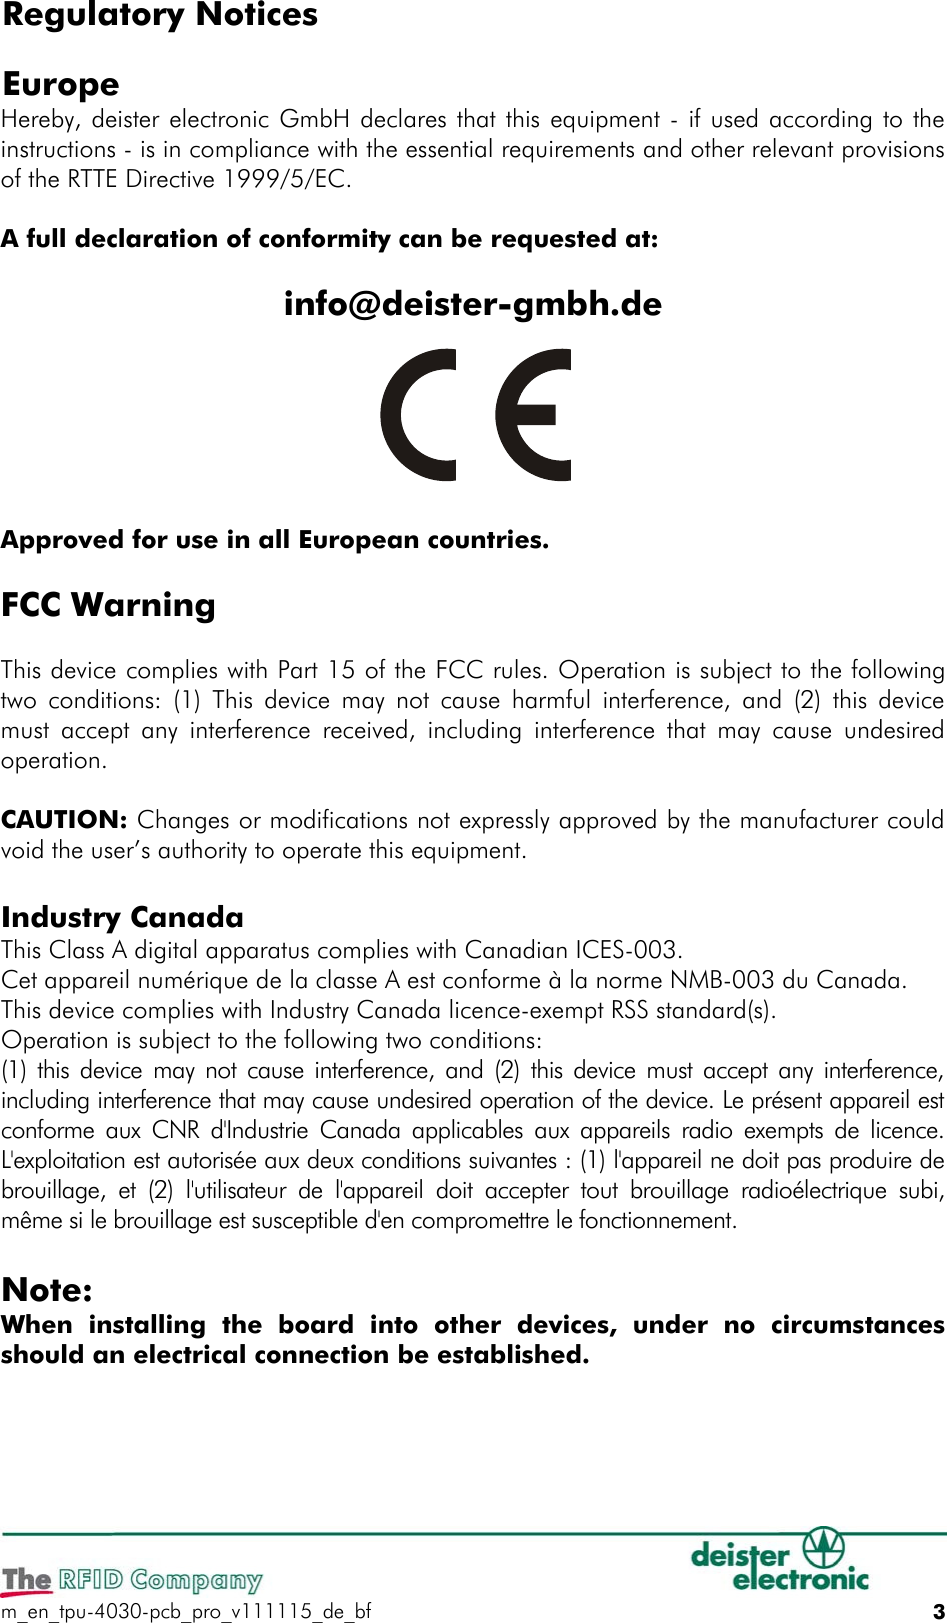 Regulatory Notices EuropeHereby, deister electronic GmbH declares that this equipment - if used according to the instructions - is in compliance with the essential requirements and other relevant provisions of the RTTE Directive 1999/5/EC.A full declaration of conformity can be requested at:info@deister-gmbh.deApproved for use in all European countries.FCC WarningThis device complies with Part 15 of the FCC rules. Operation is subject to the following two conditions: (1) This device may not cause harmful interference, and (2) this device must accept any interference received, including interference that may cause undesired operation.CAUTION: Changes or modifications not expressly approved by the manufacturer could void the user’s authority to operate this equipment.Industry CanadaThis Class A digital apparatus complies with Canadian ICES-003.Cet appareil numérique de la classe A est conforme à la norme NMB-003 du Canada.This device complies with Industry Canada licence-exempt RSS standard(s). Operation is subject to the following two conditions: (1) this device may not cause interference, and (2) this device must accept any interference, including interference that may cause undesired operation of the device. Le présent appareil est conforme aux CNR d&apos;Industrie Canada applicables aux appareils radio exempts de licence. L&apos;exploitation est autorisée aux deux conditions suivantes : (1) l&apos;appareil ne doit pas produire de brouillage, et  (2)  l&apos;utilisateur de  l&apos;appareil  doit accepter  tout brouillage radioélectrique subi, même si le brouillage est susceptible d&apos;en compromettre le fonctionnement.Note:When  installing  the  board  into  other  devices,  under  no  circumstances should an electrical connection be established. m_en_tpu-4030-pcb_pro_v111115_de_bf 3